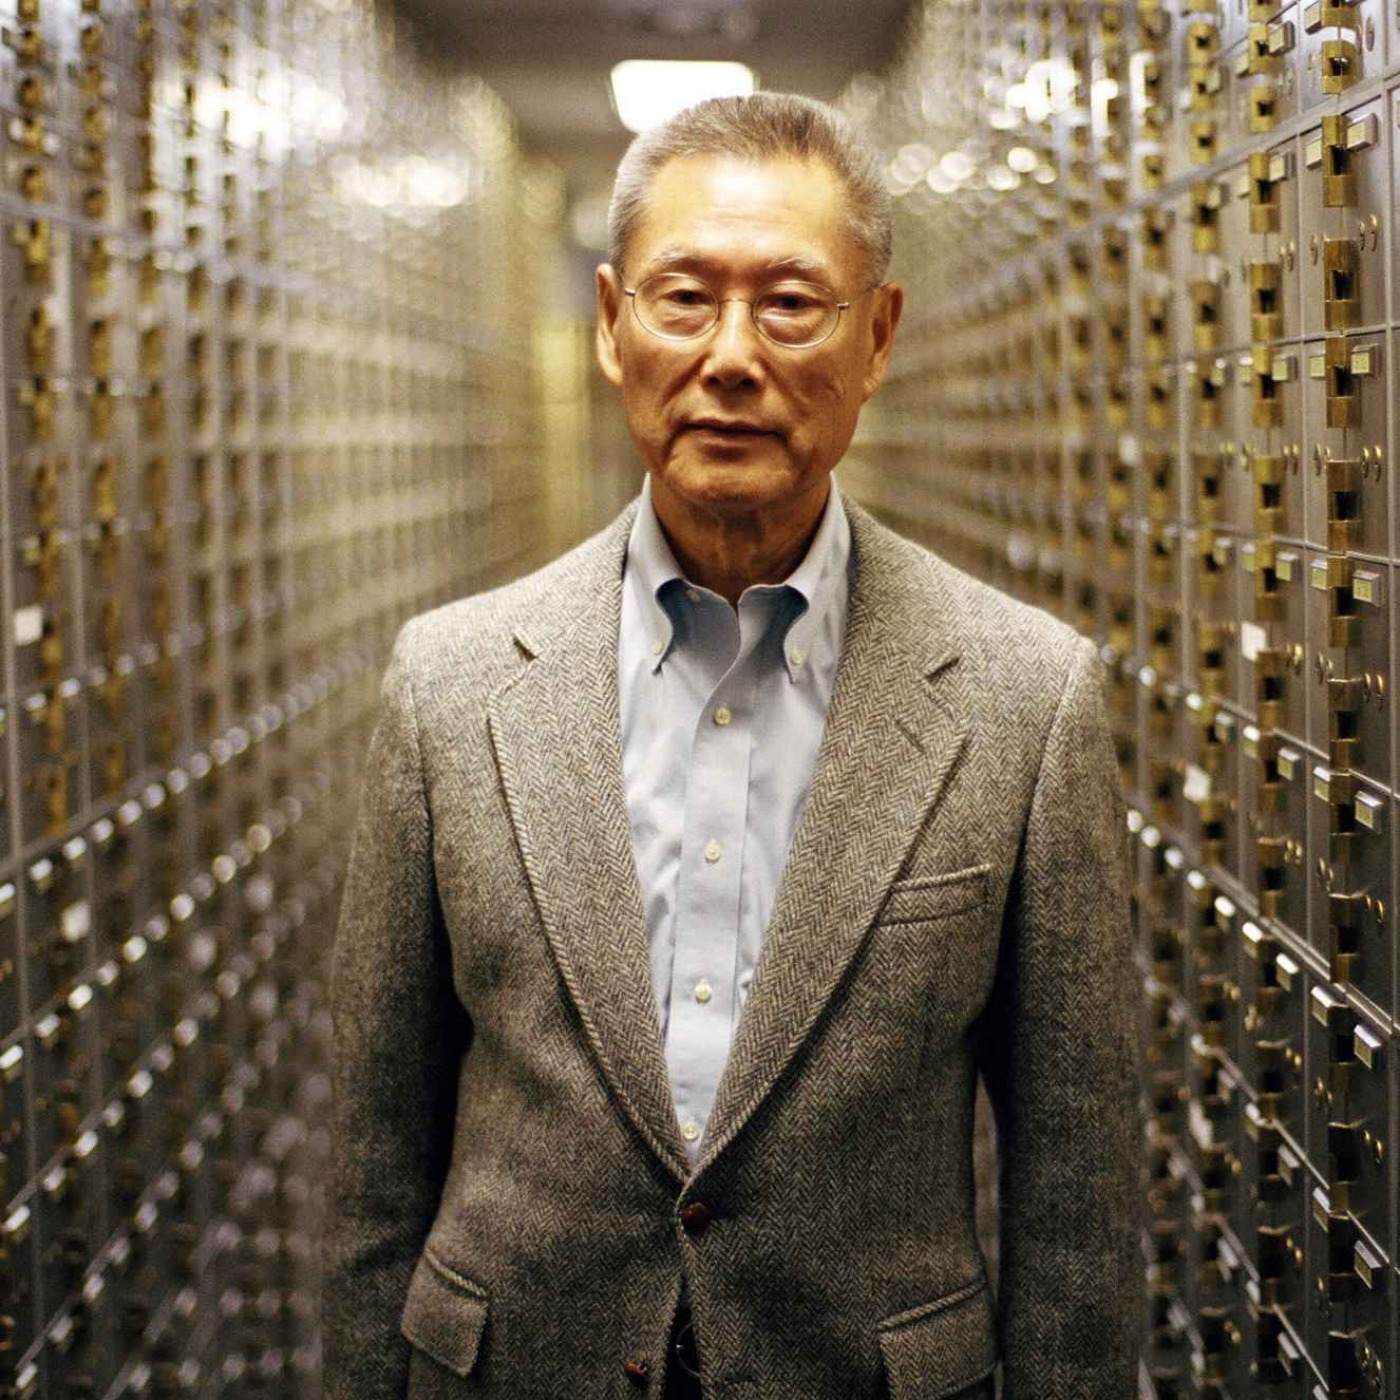 Steve James - Abacus: Small Enough to Jail